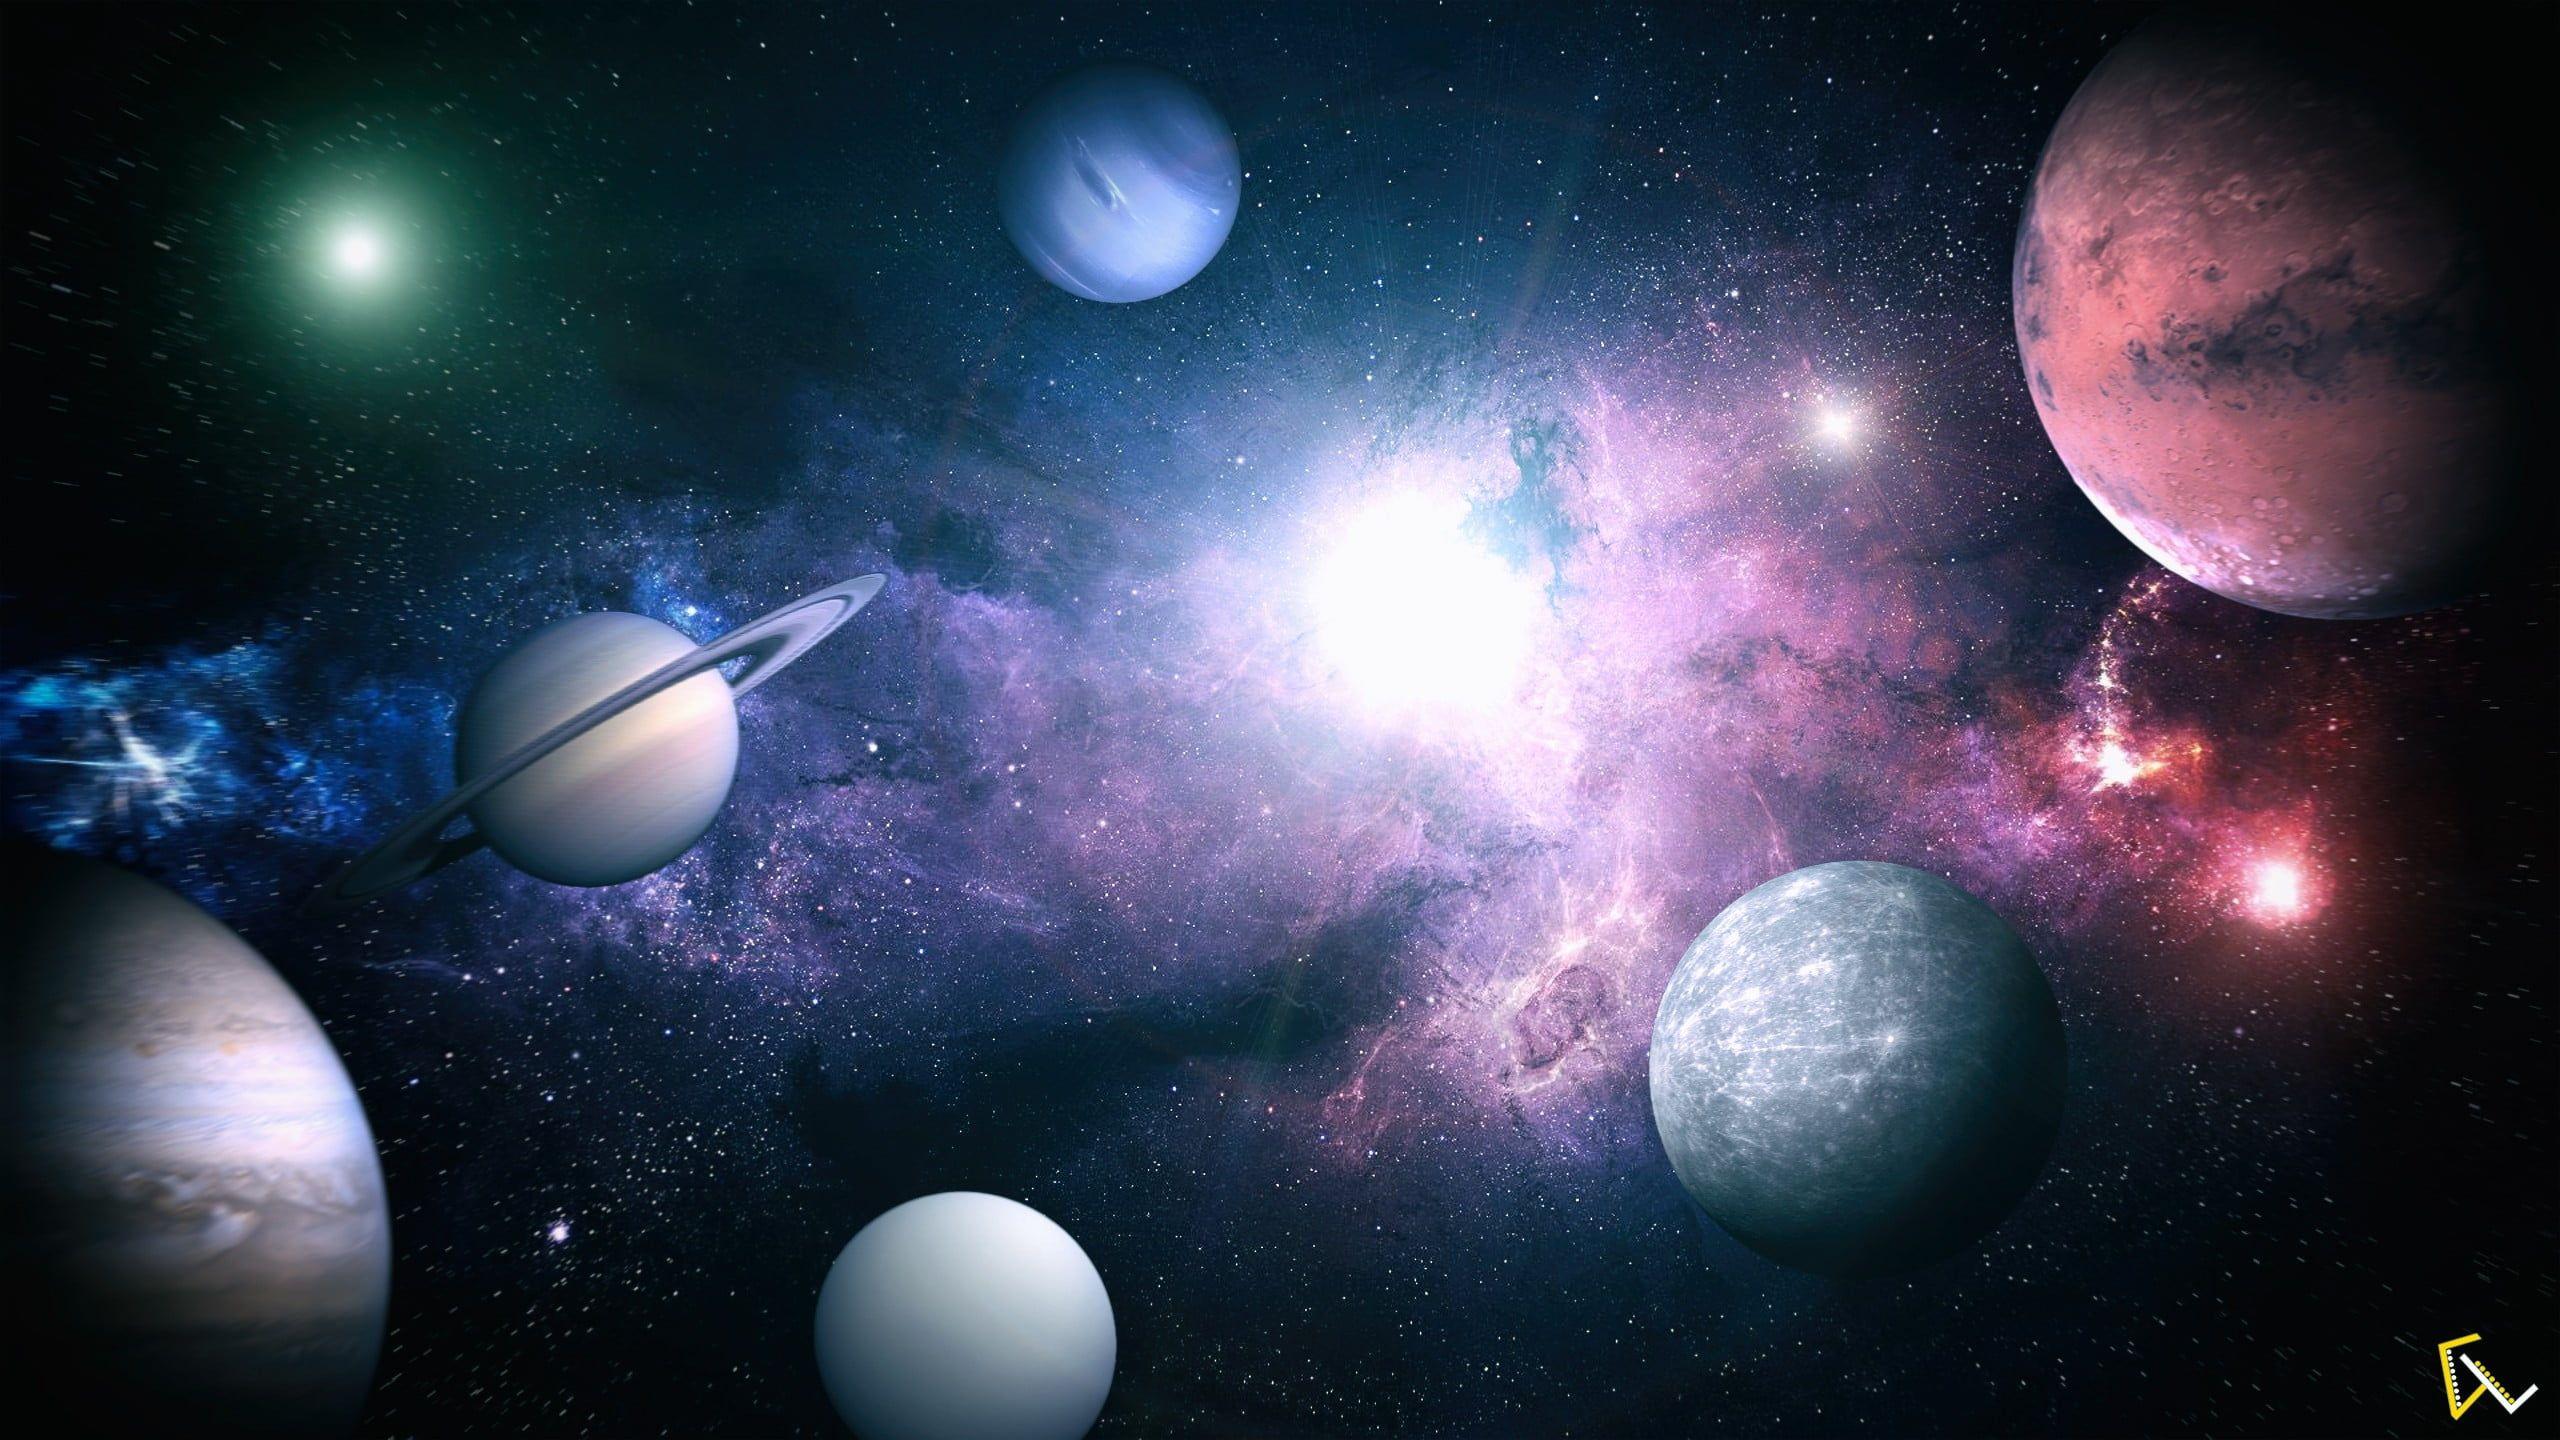 Solar System Planets Wallpapers Top Free Solar System Planets Backgrounds Wallpaperaccess 2842